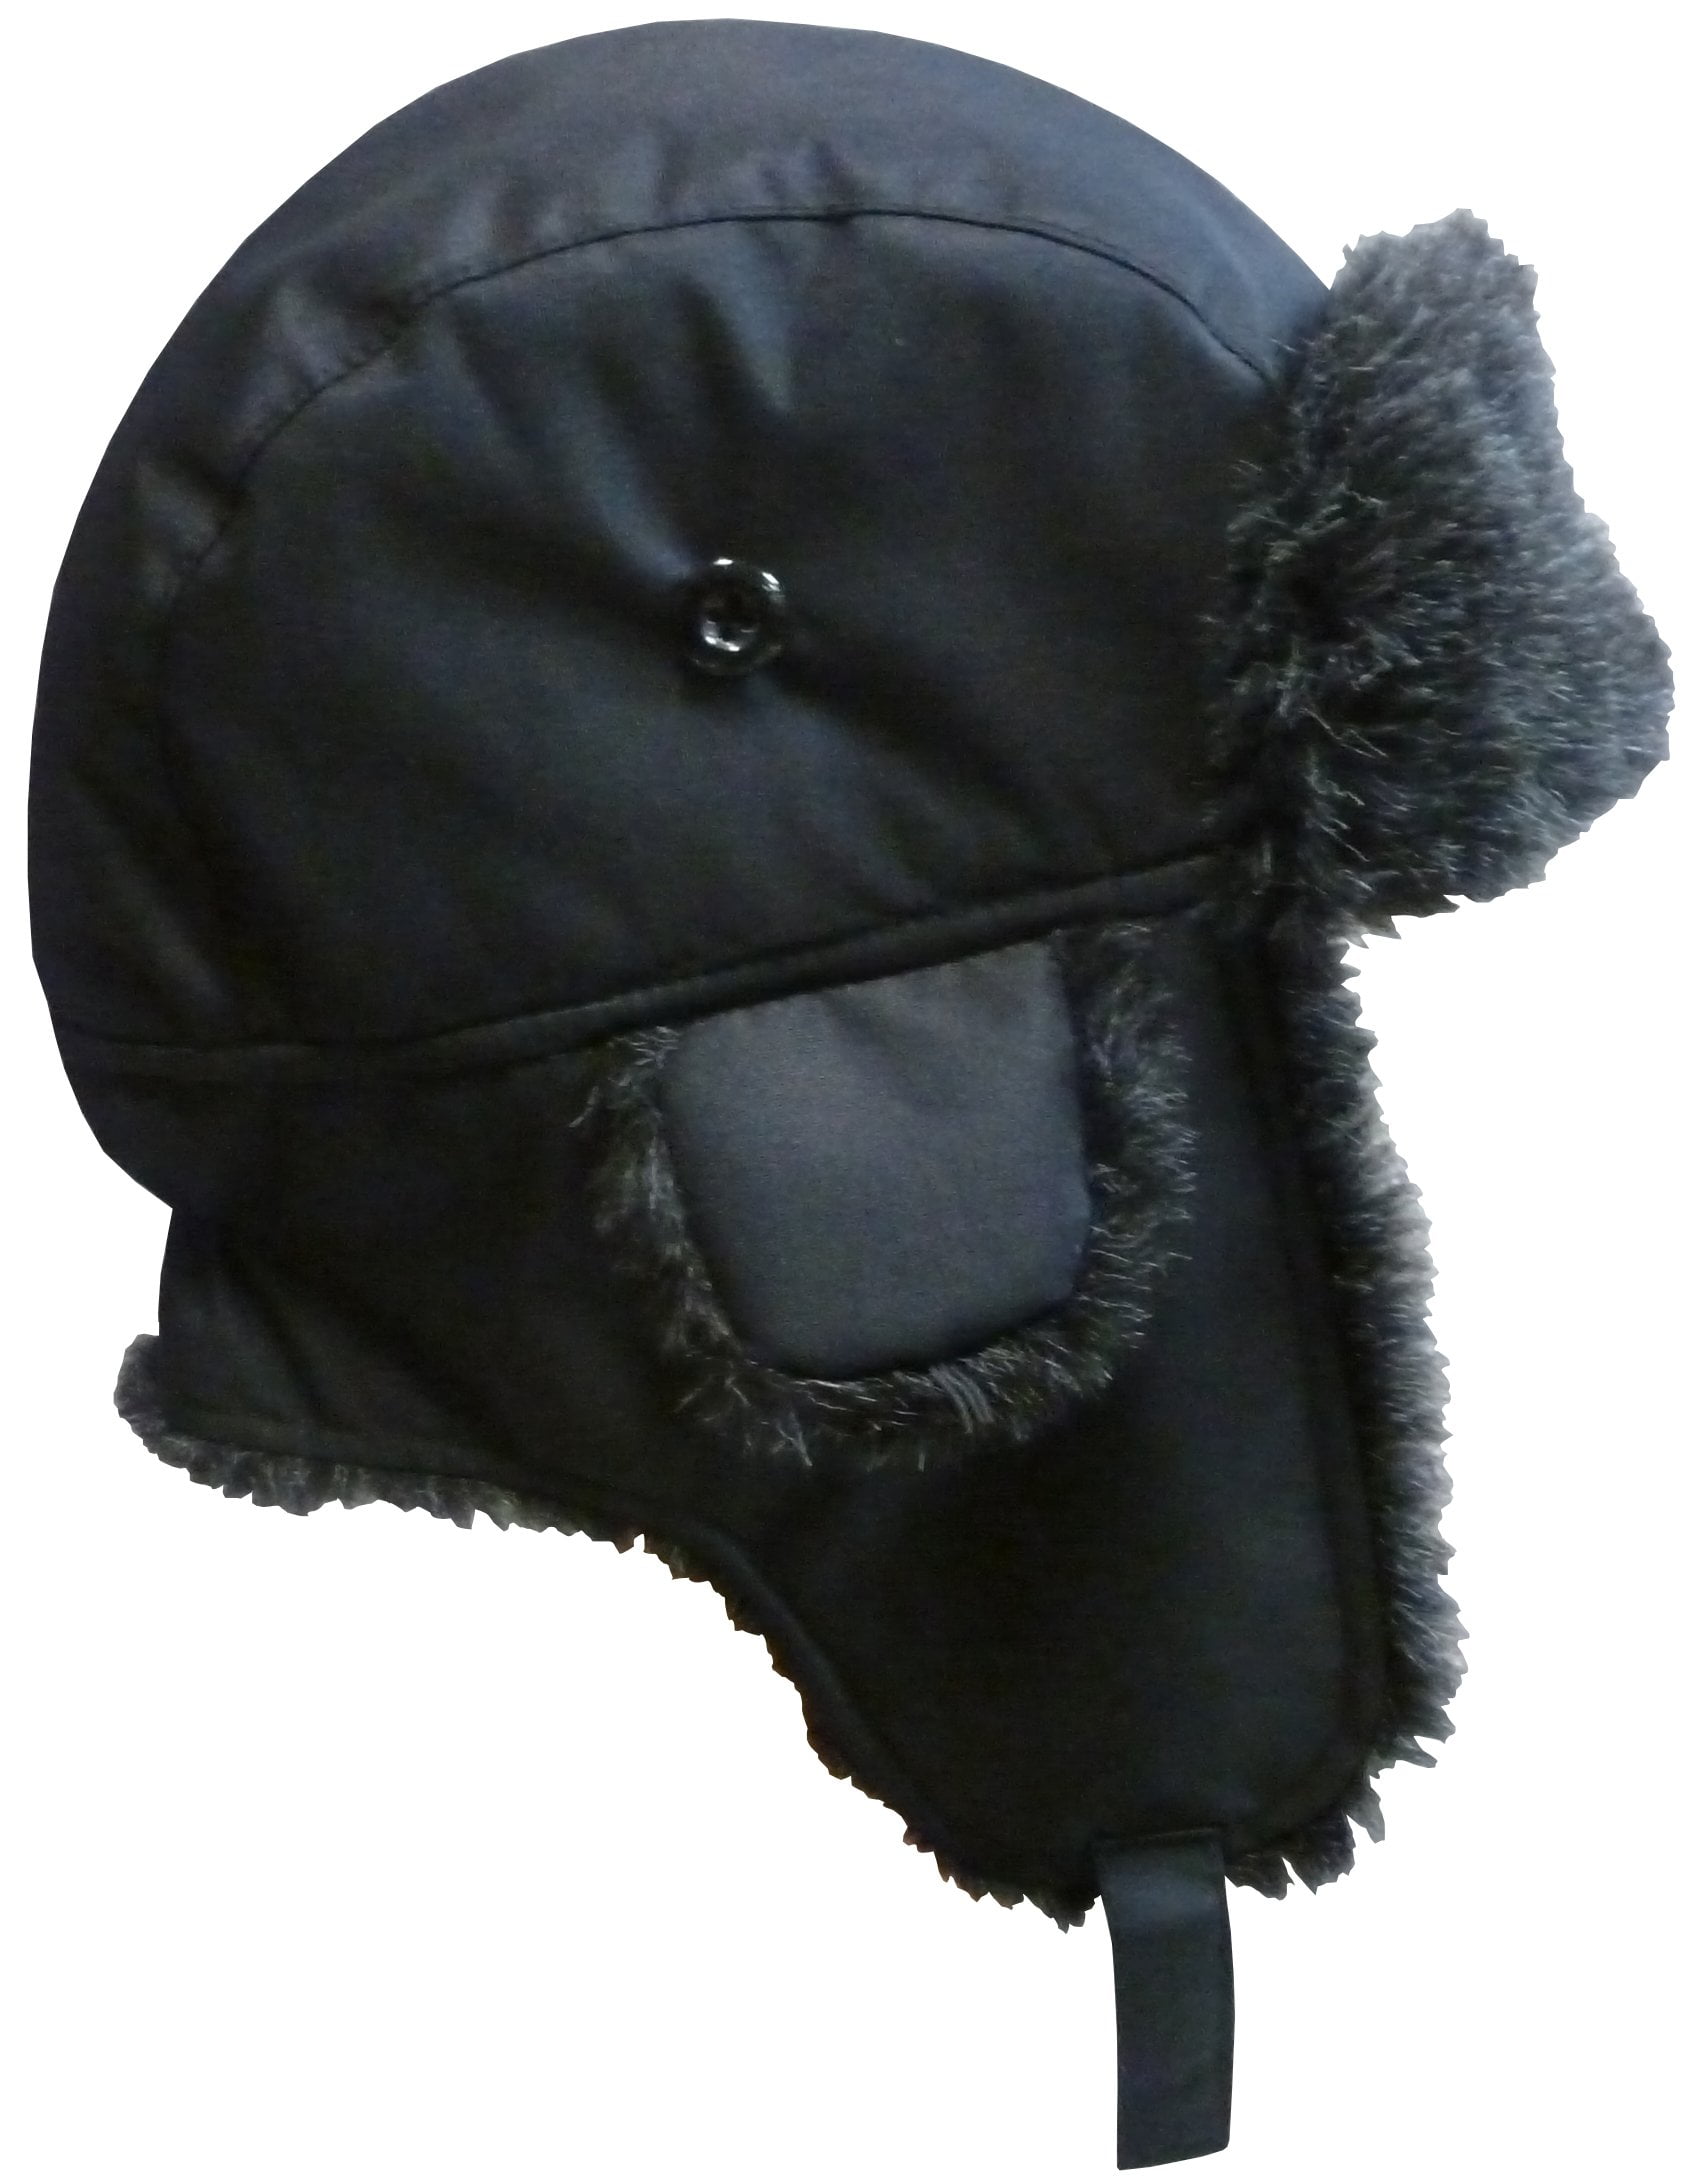 NICE CAPS Men's Cold Weather Taslon Trapper Hat with Flaps 